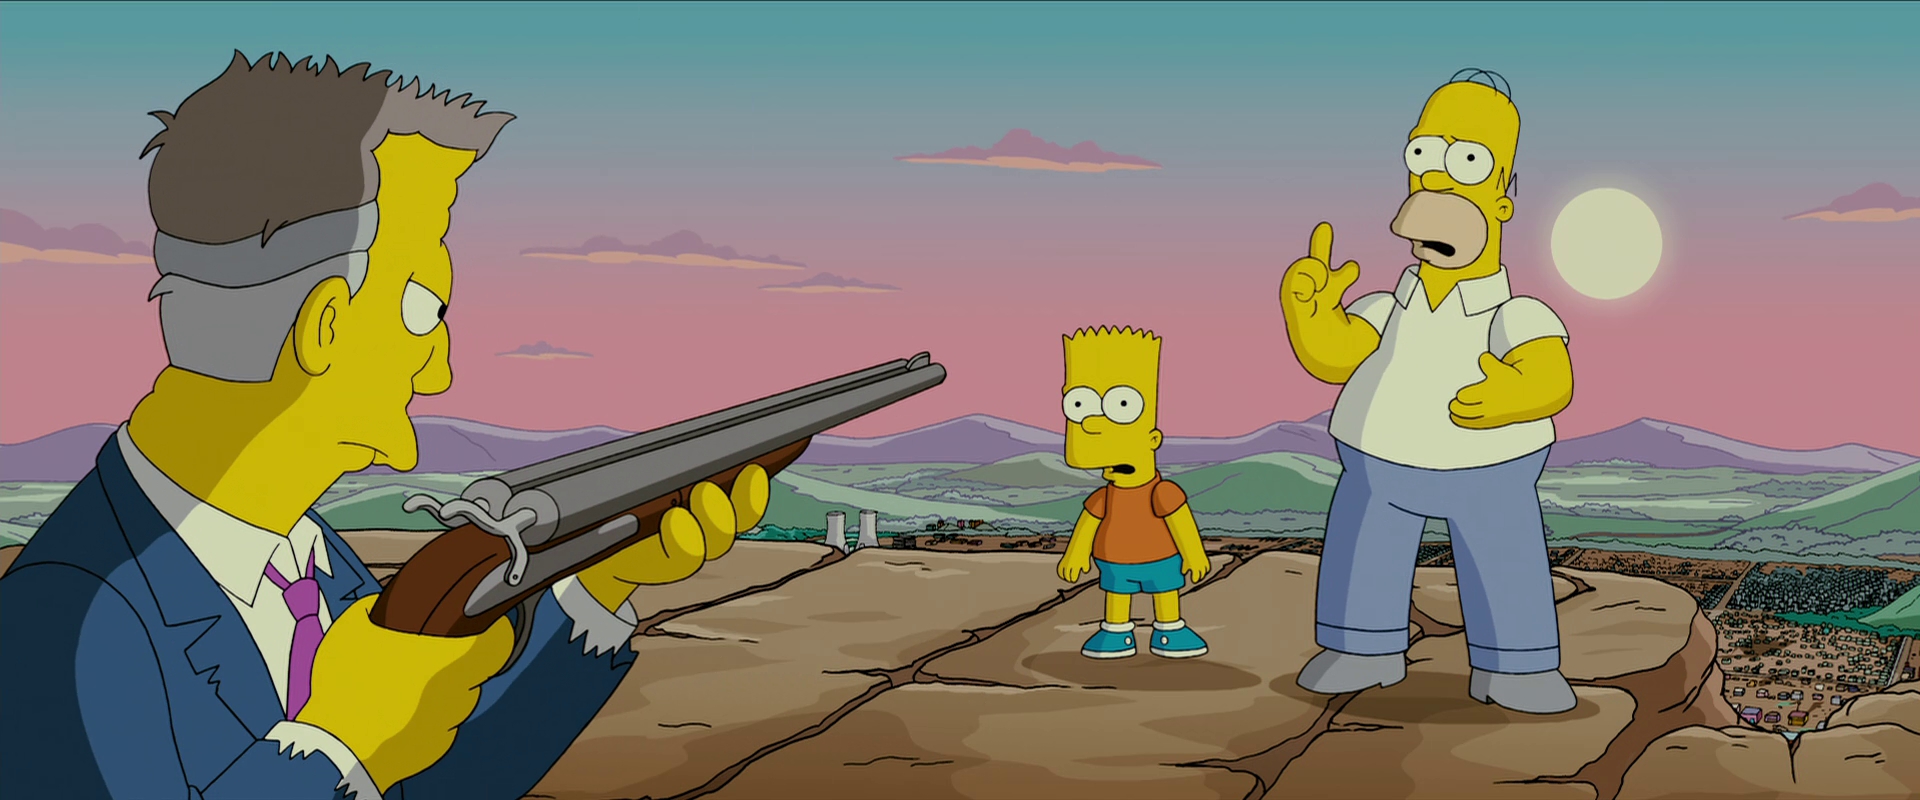 The Simpsons Movie Backgrounds, Compatible - PC, Mobile, Gadgets| 1920x800 px